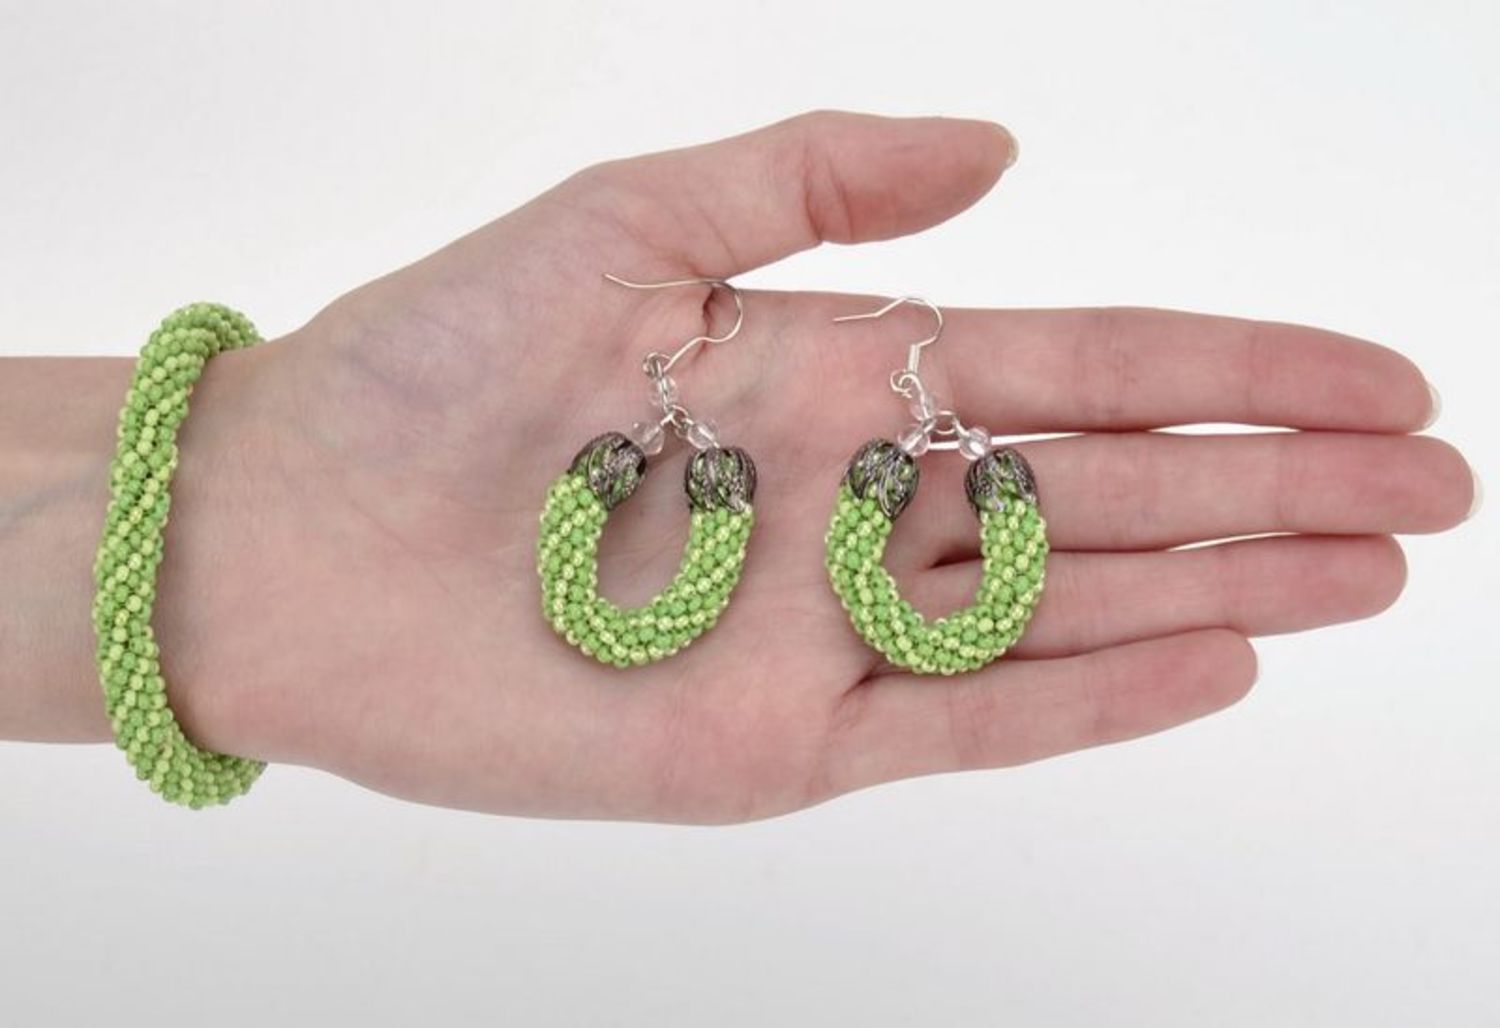 Earrings and bracelet made from green beads photo 5